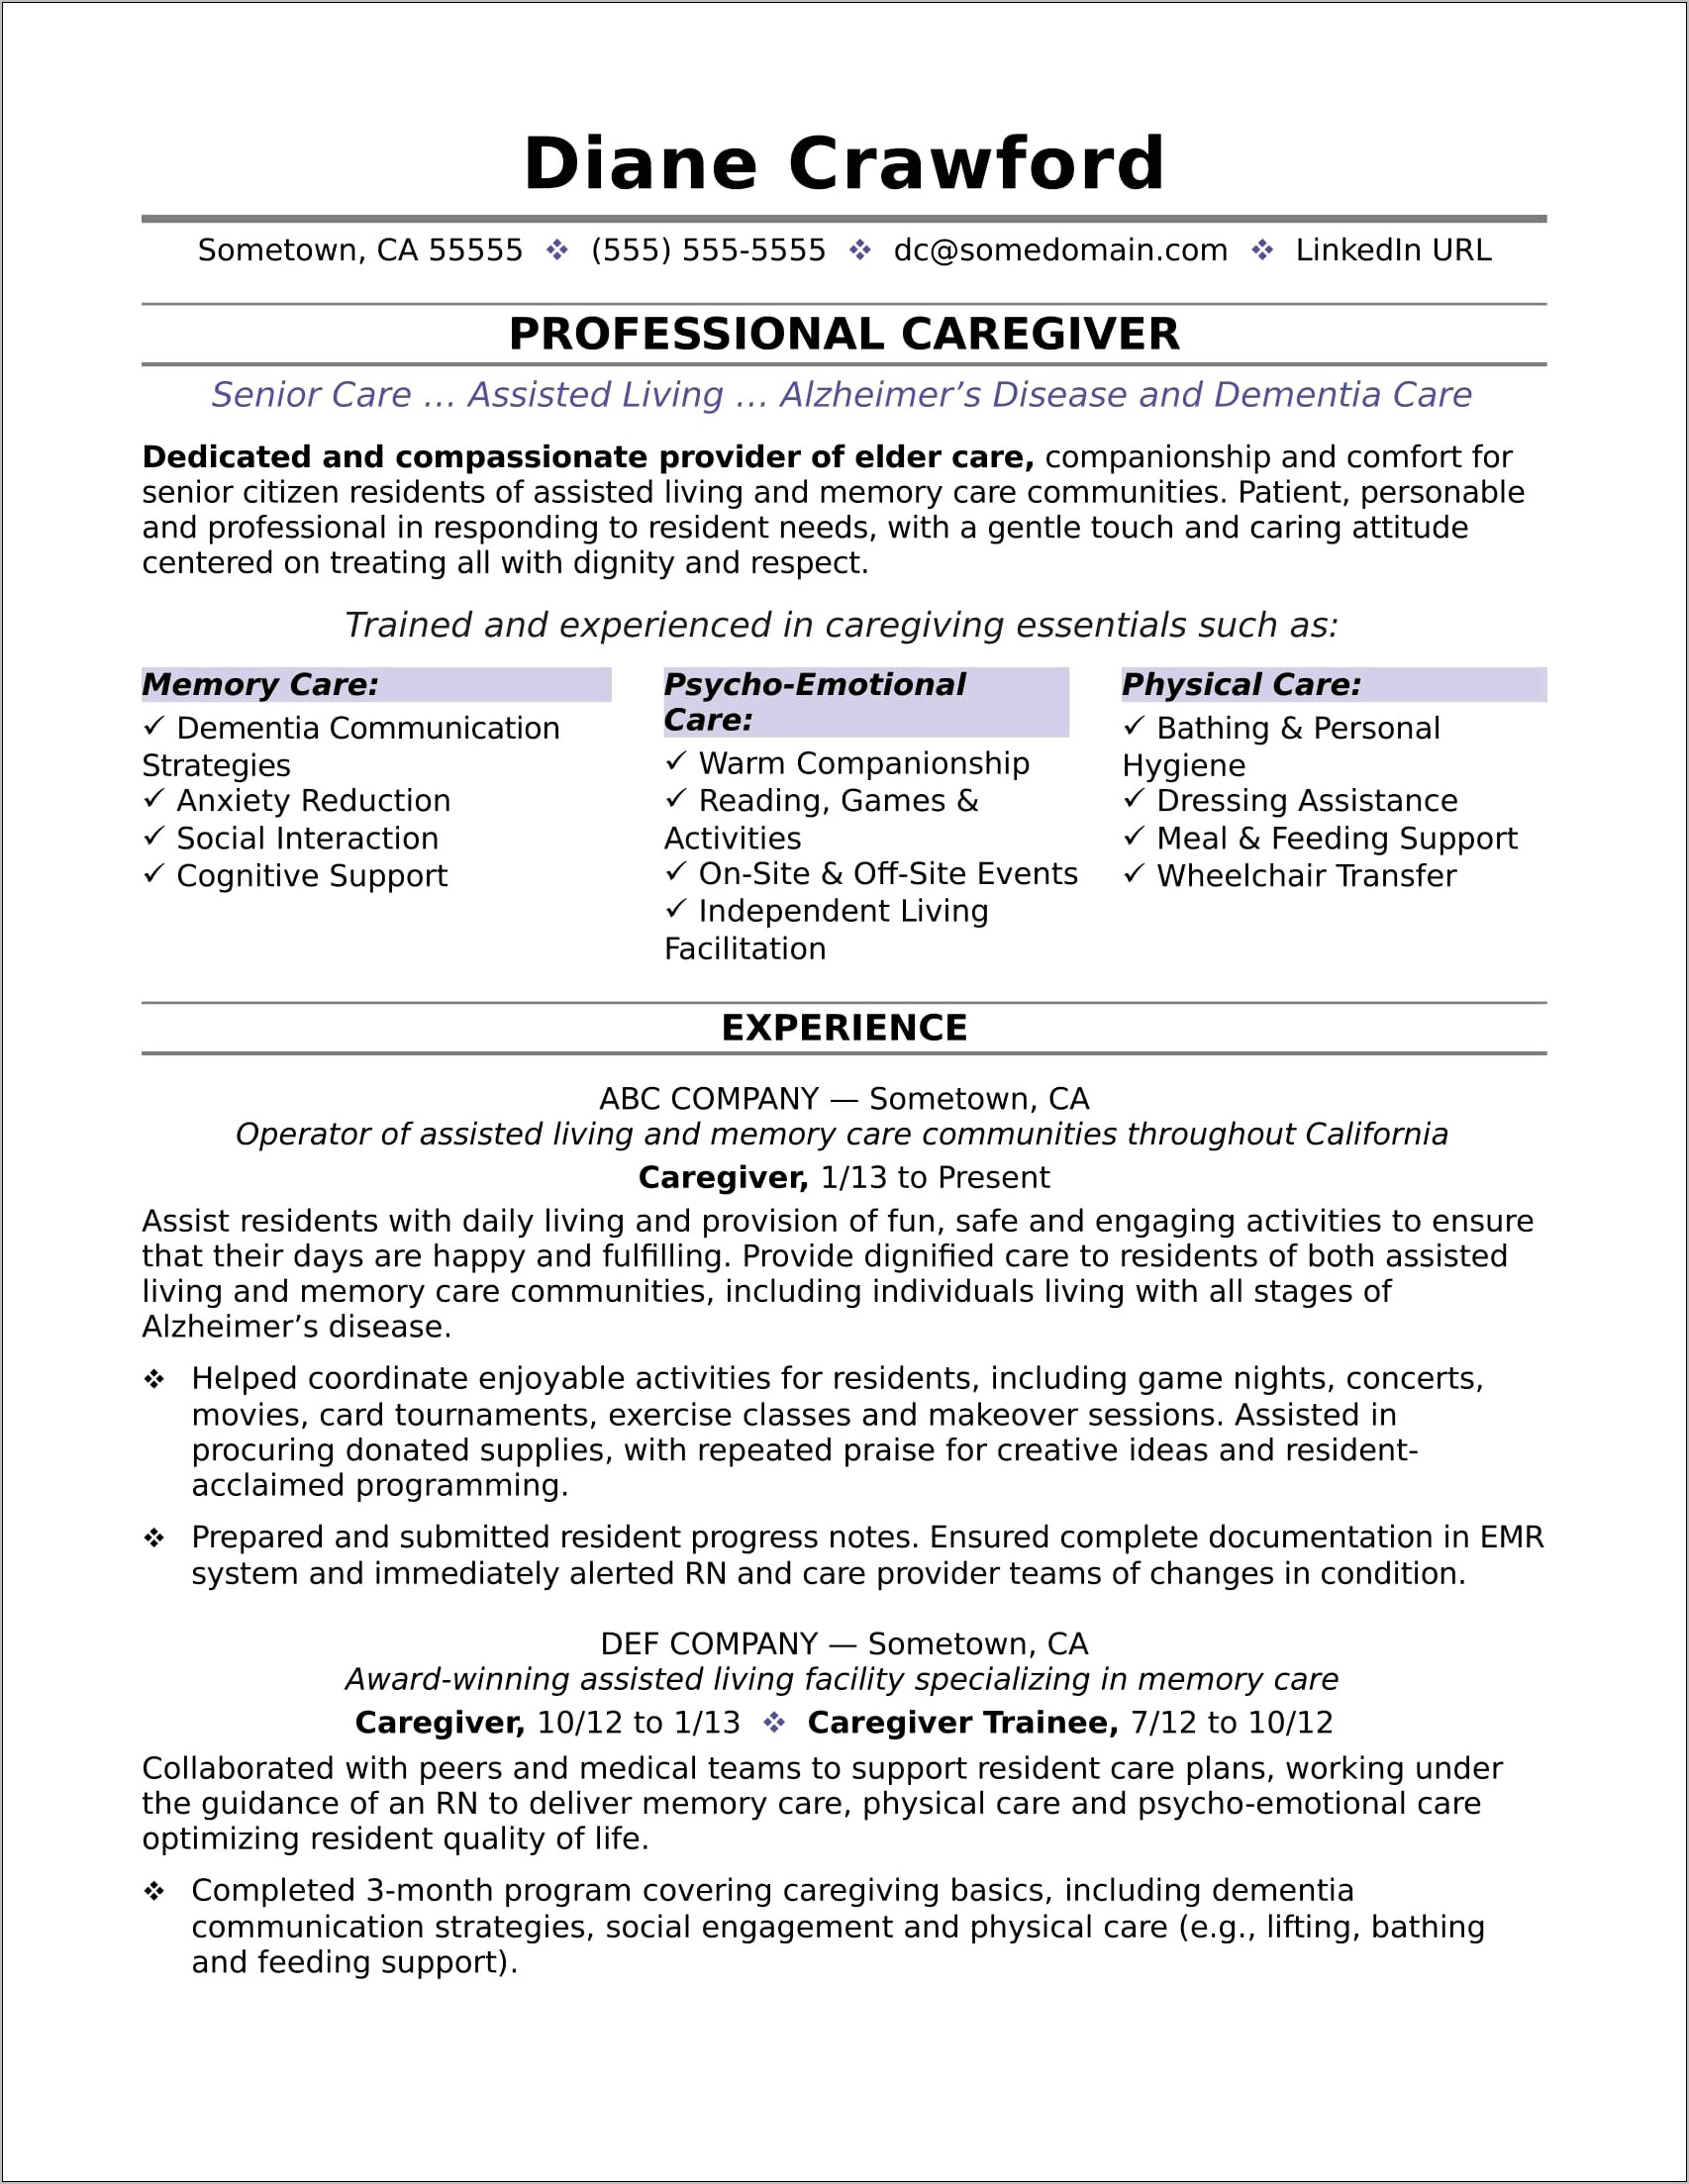 Example Adult Day Center Provider Resume